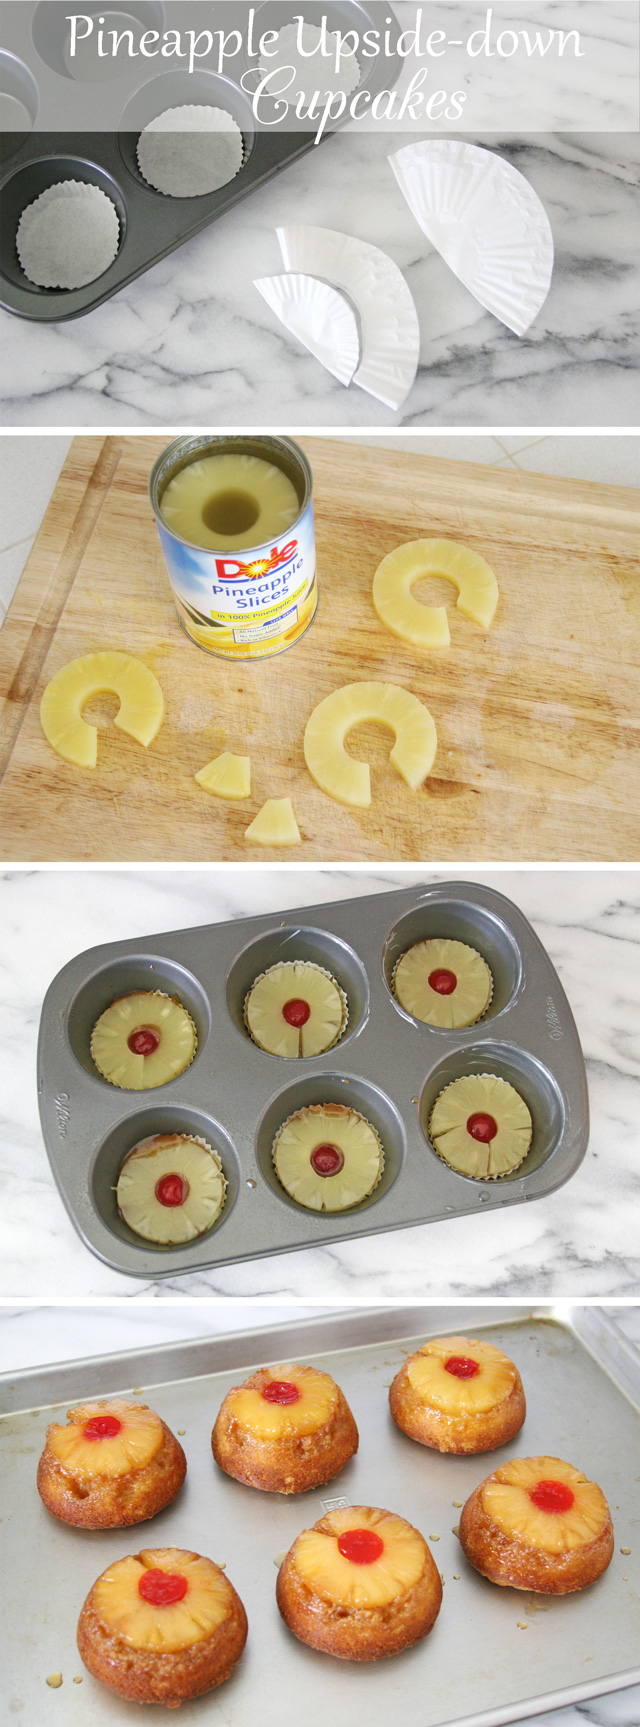 How to make Pineapple Upside-Down Cupcakes - by Glorious Treats